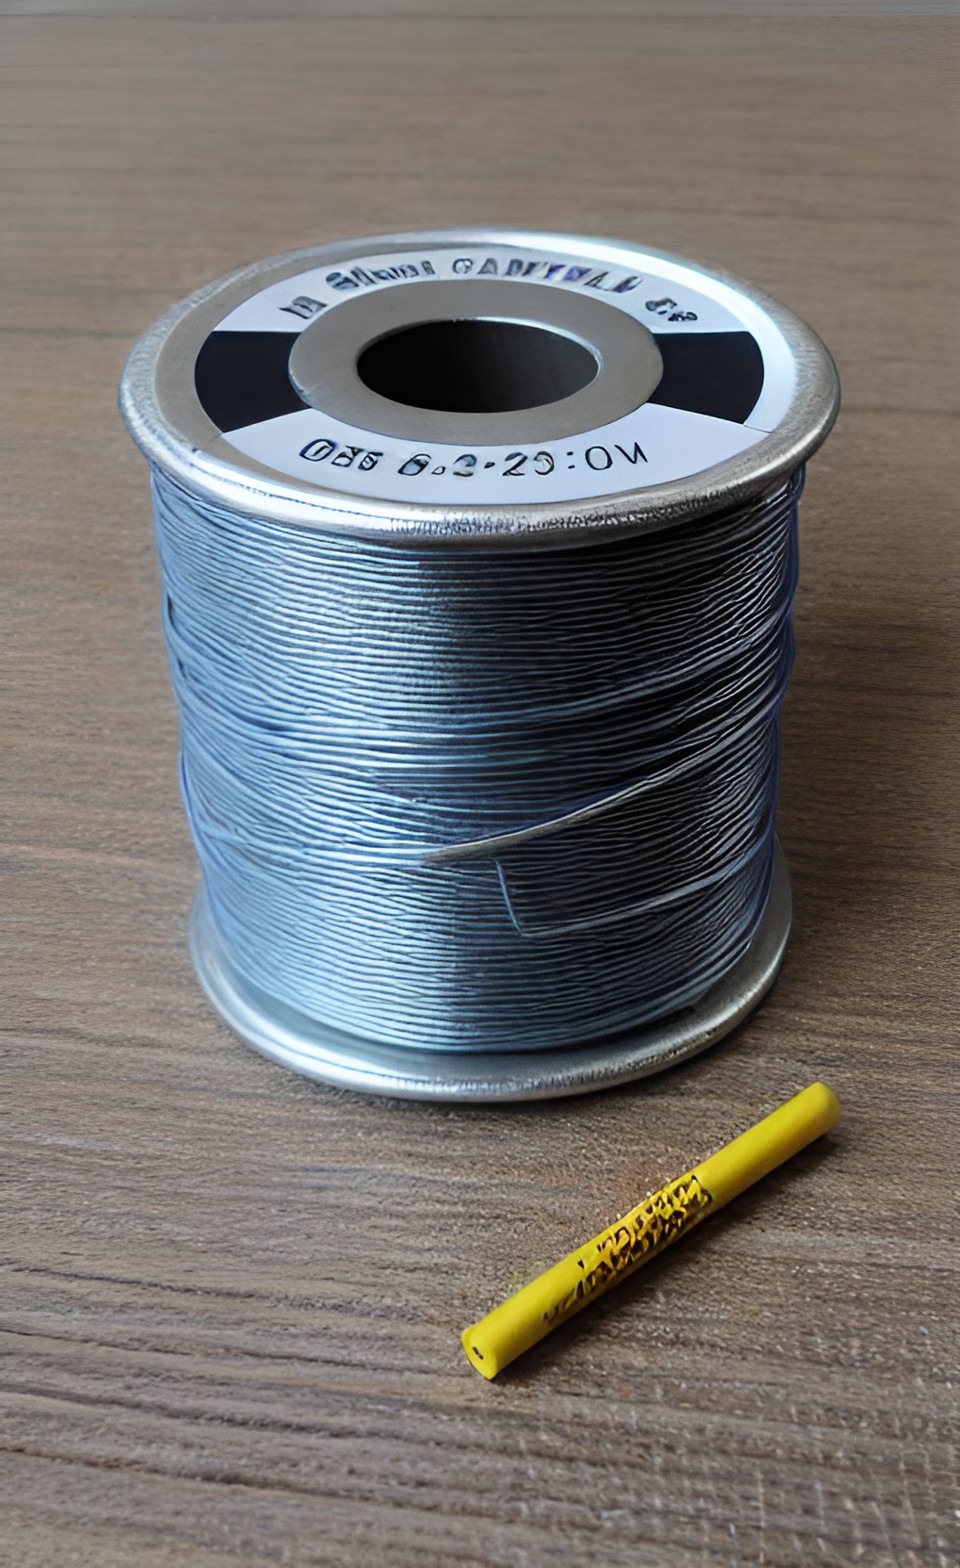 20 Gauge Stainless Steel Wire for Jewelry Making, Bailing Wire Snare Wire